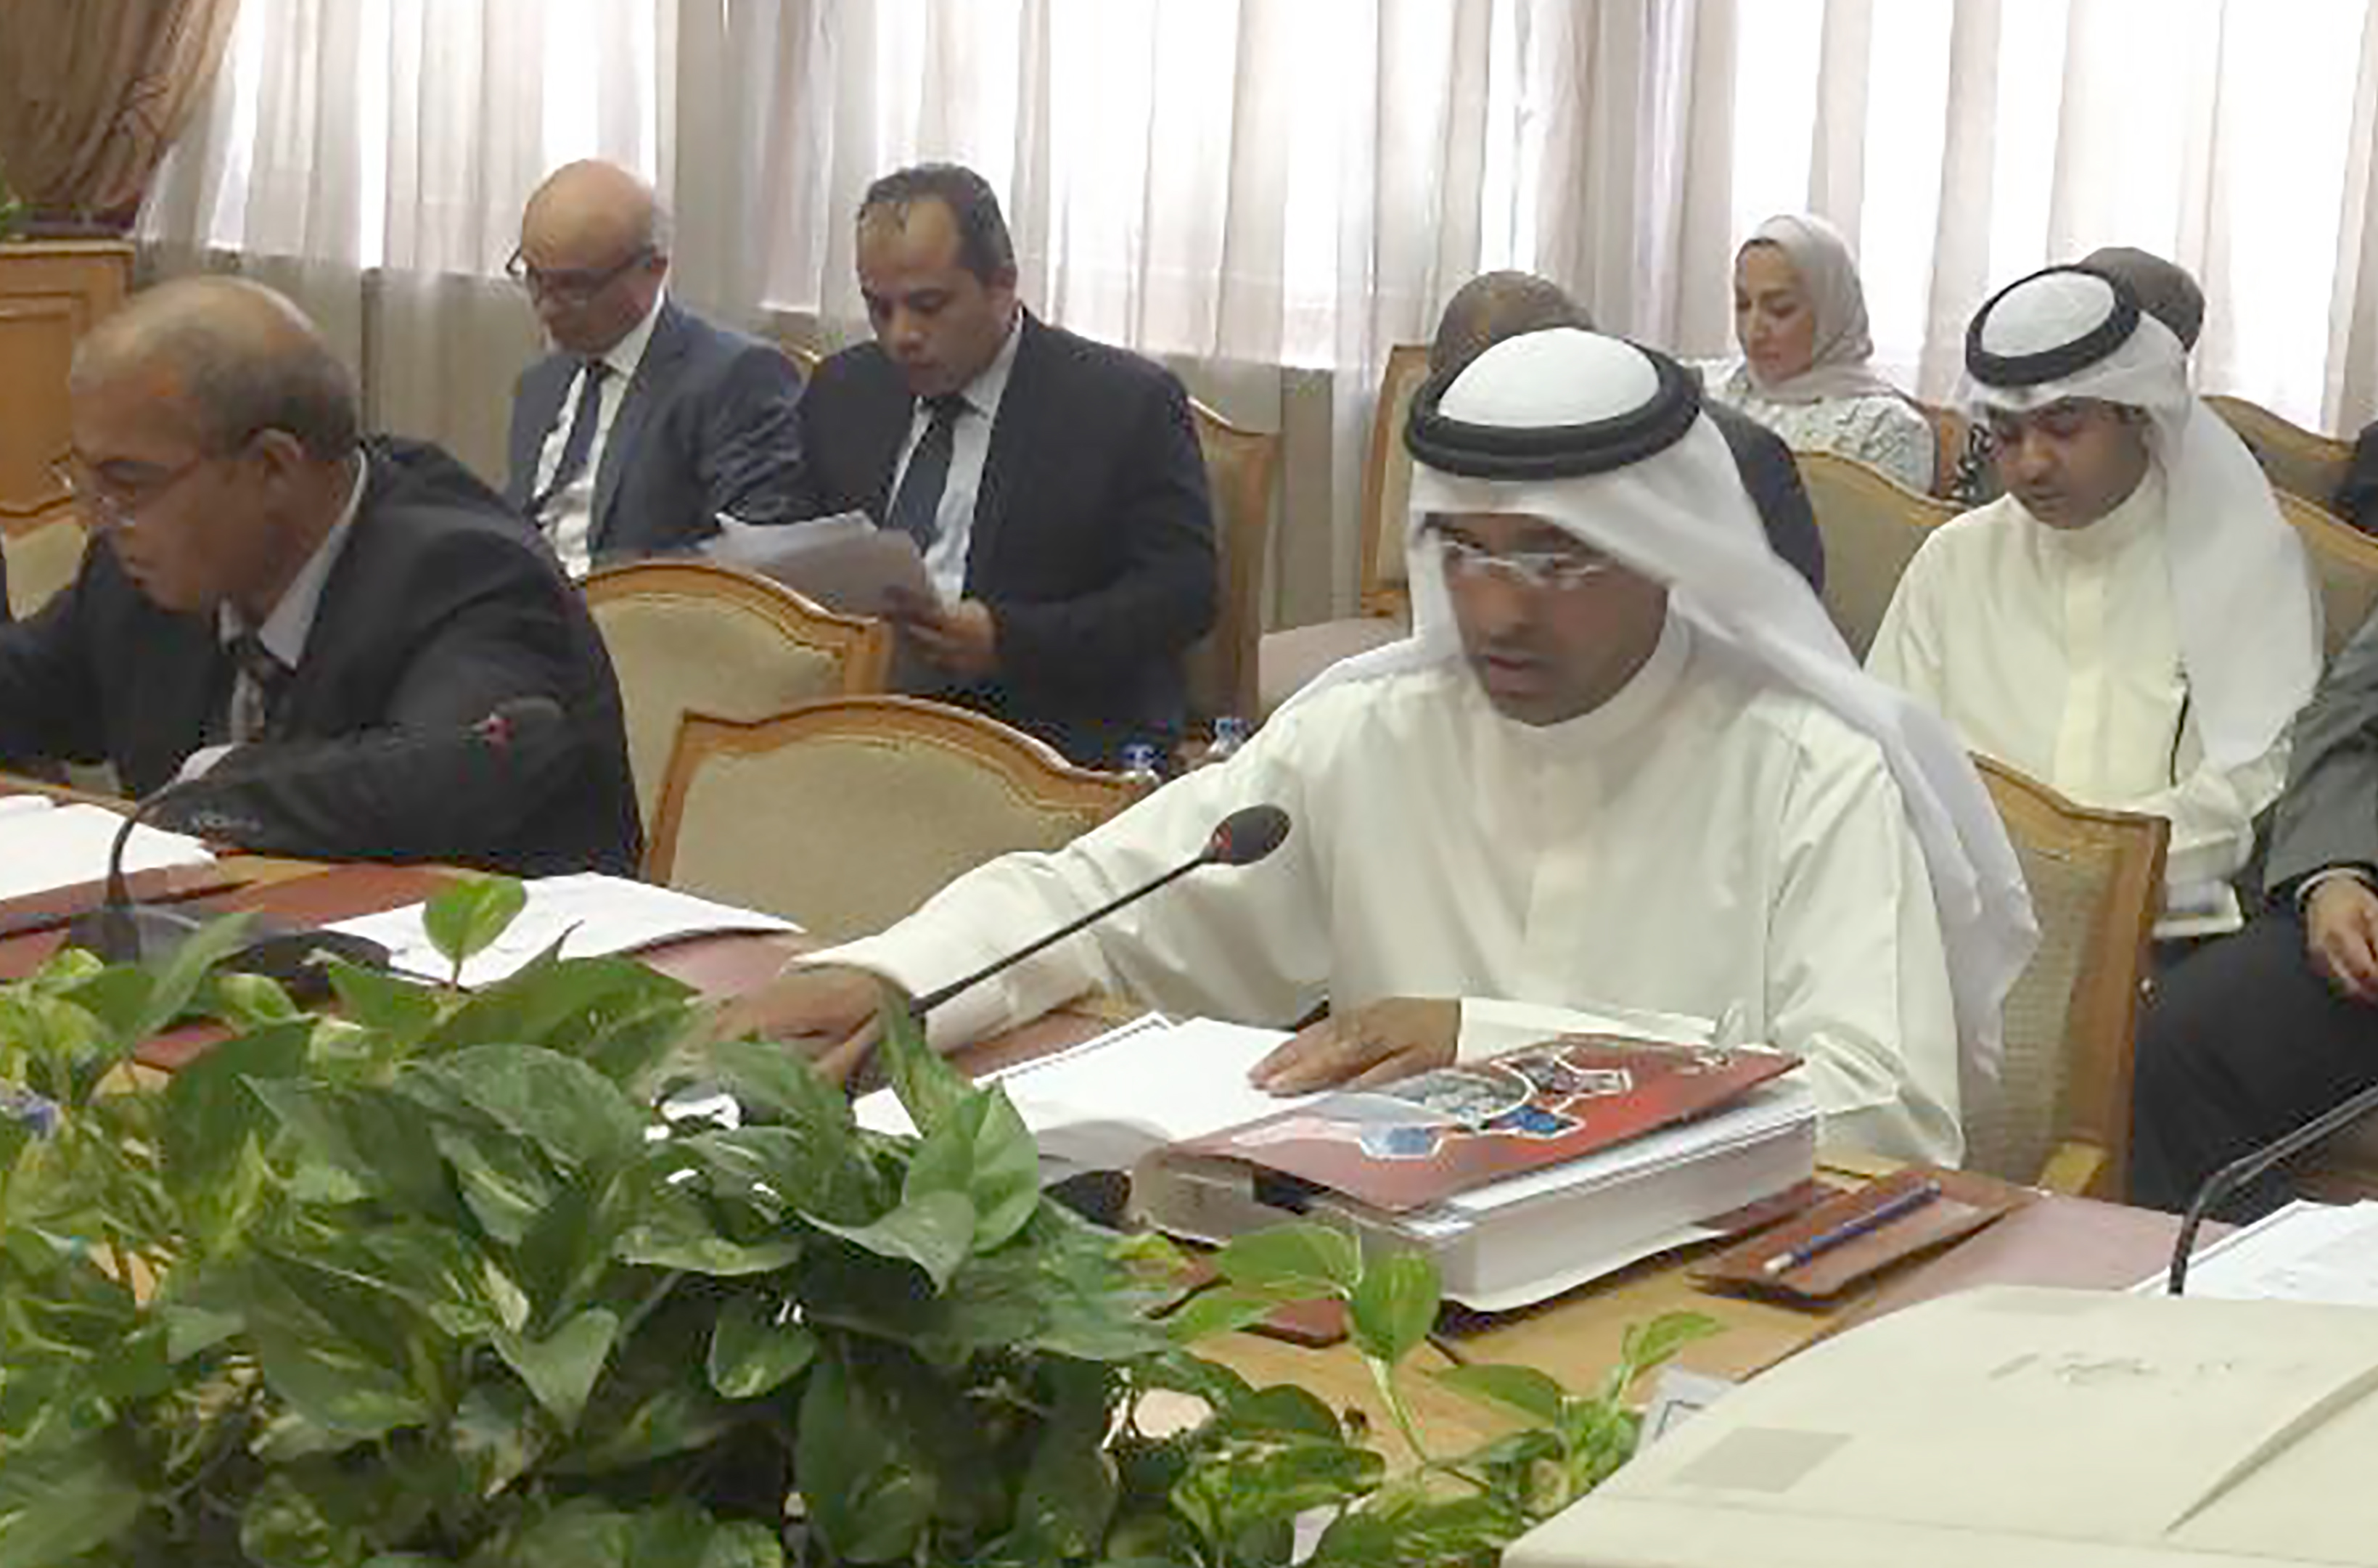 Public Authority for Industry (PAI) Director for Development and Industrial Support Abdullah Al-Hajri during the meetings of the 28th Technical Committee on Rules of Origin, at the Arab League